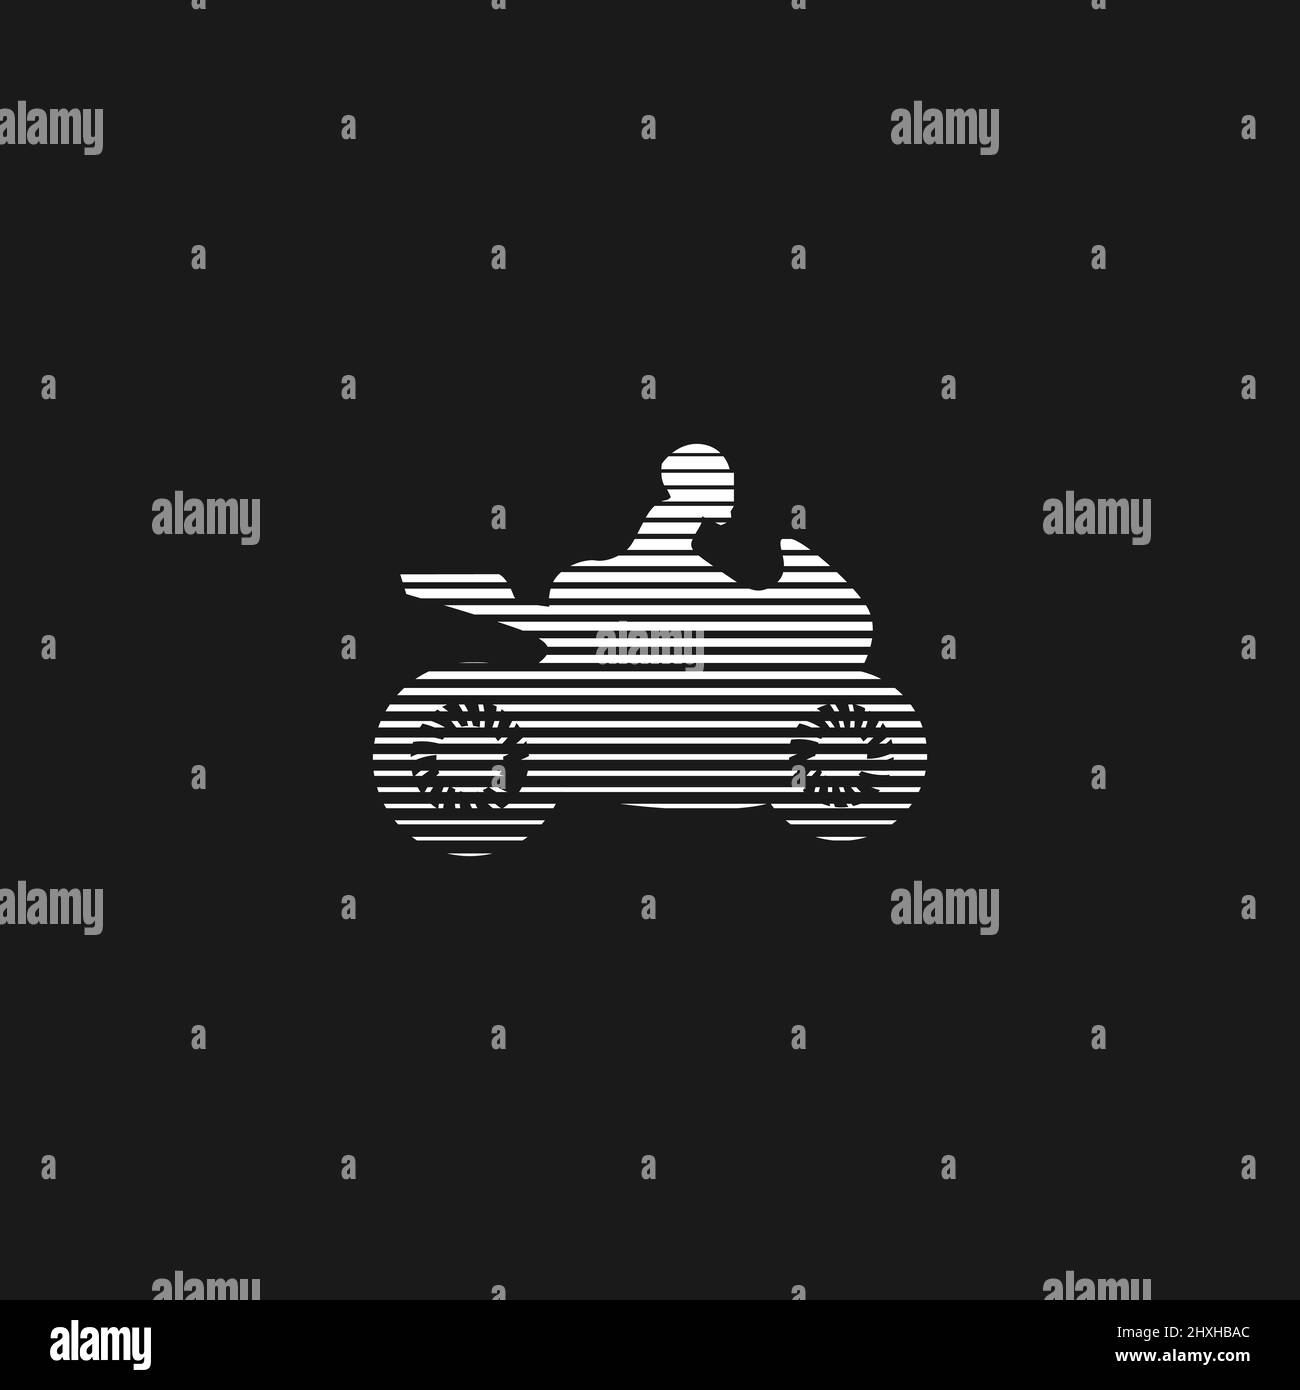 Retrowave sexy woman motorcyclist 1980s style with stripes. Synthwave black and white striped hot woman motorcyclist silhouette. Design element for Stock Vector